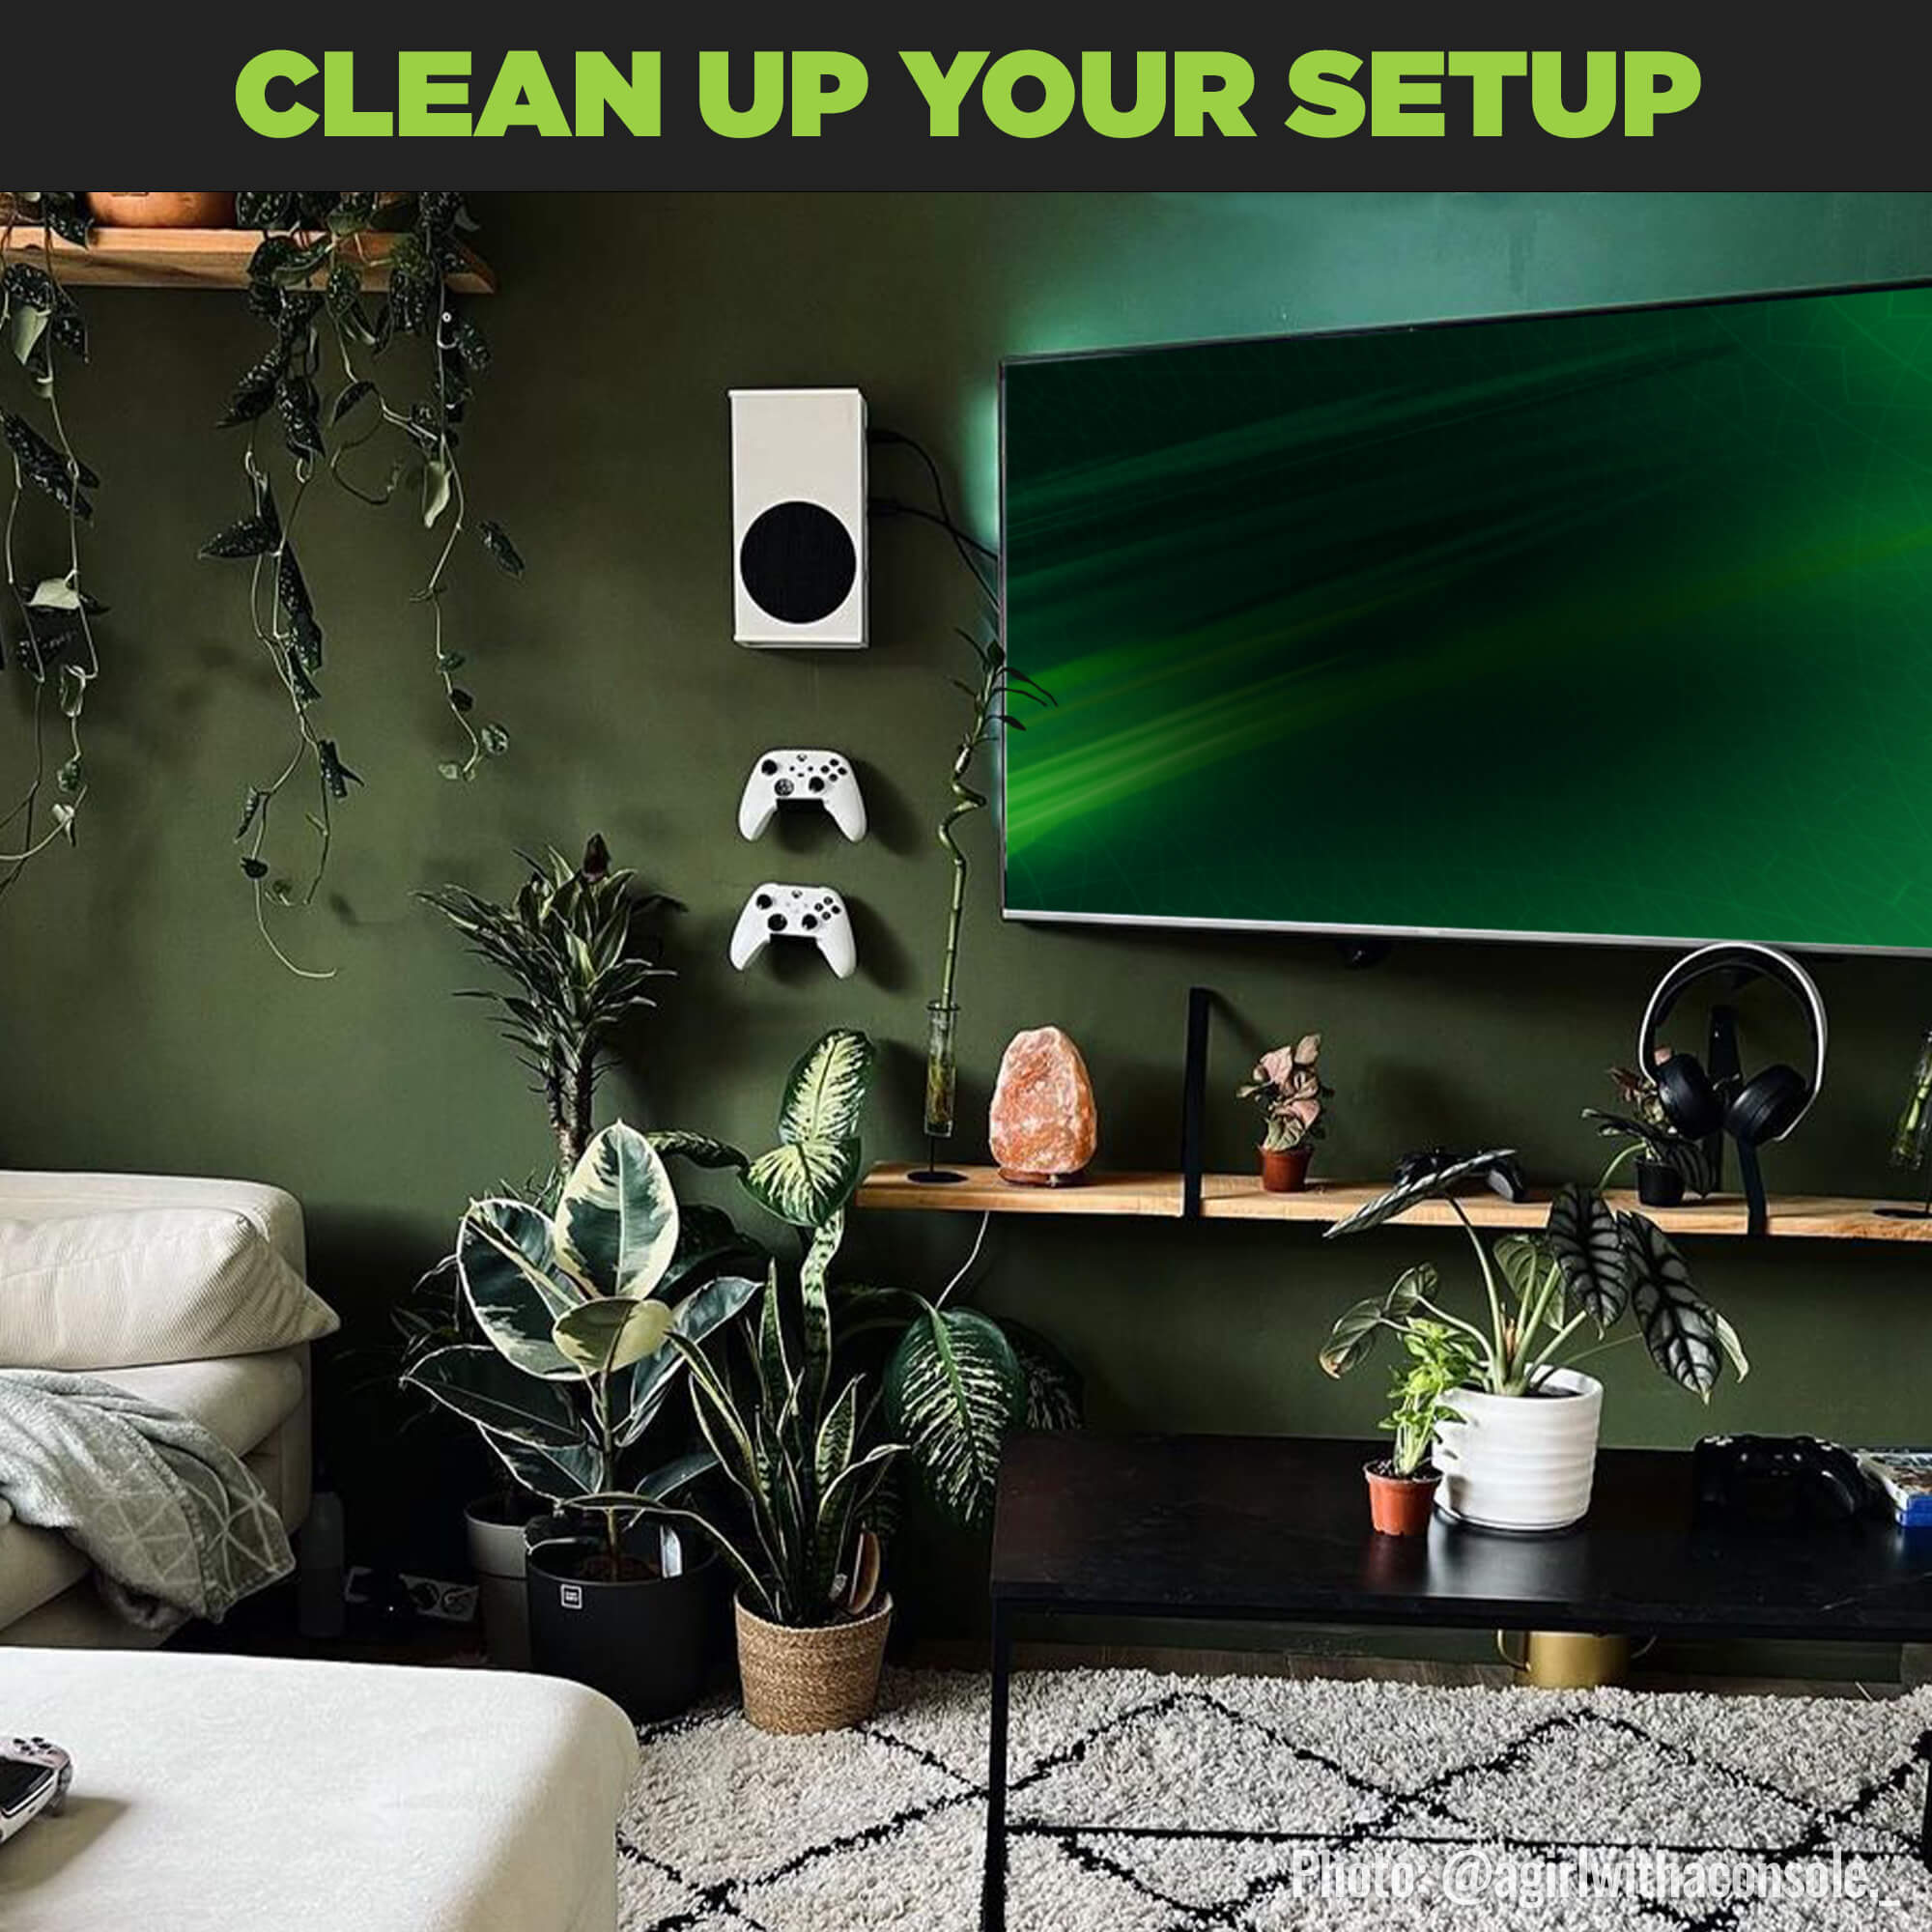 Clean up your setup with the HIDEit Mounts Xbox Series S console mount shown in a white. Perfect to organize any gaming setup.